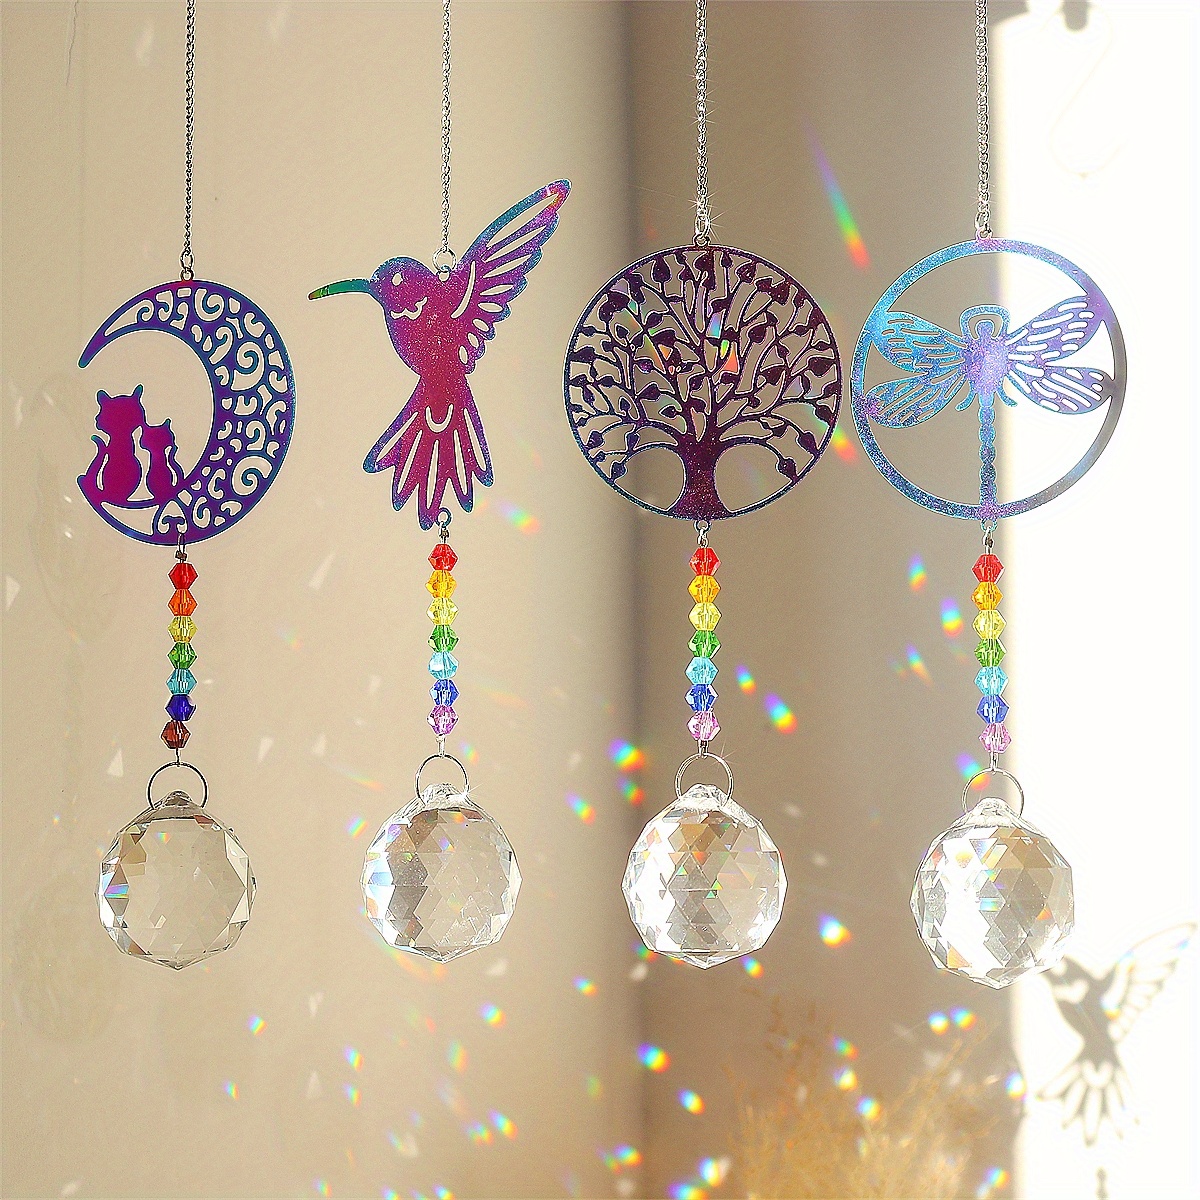 Suncatcher Bird Chime Exclusive at The Nut House